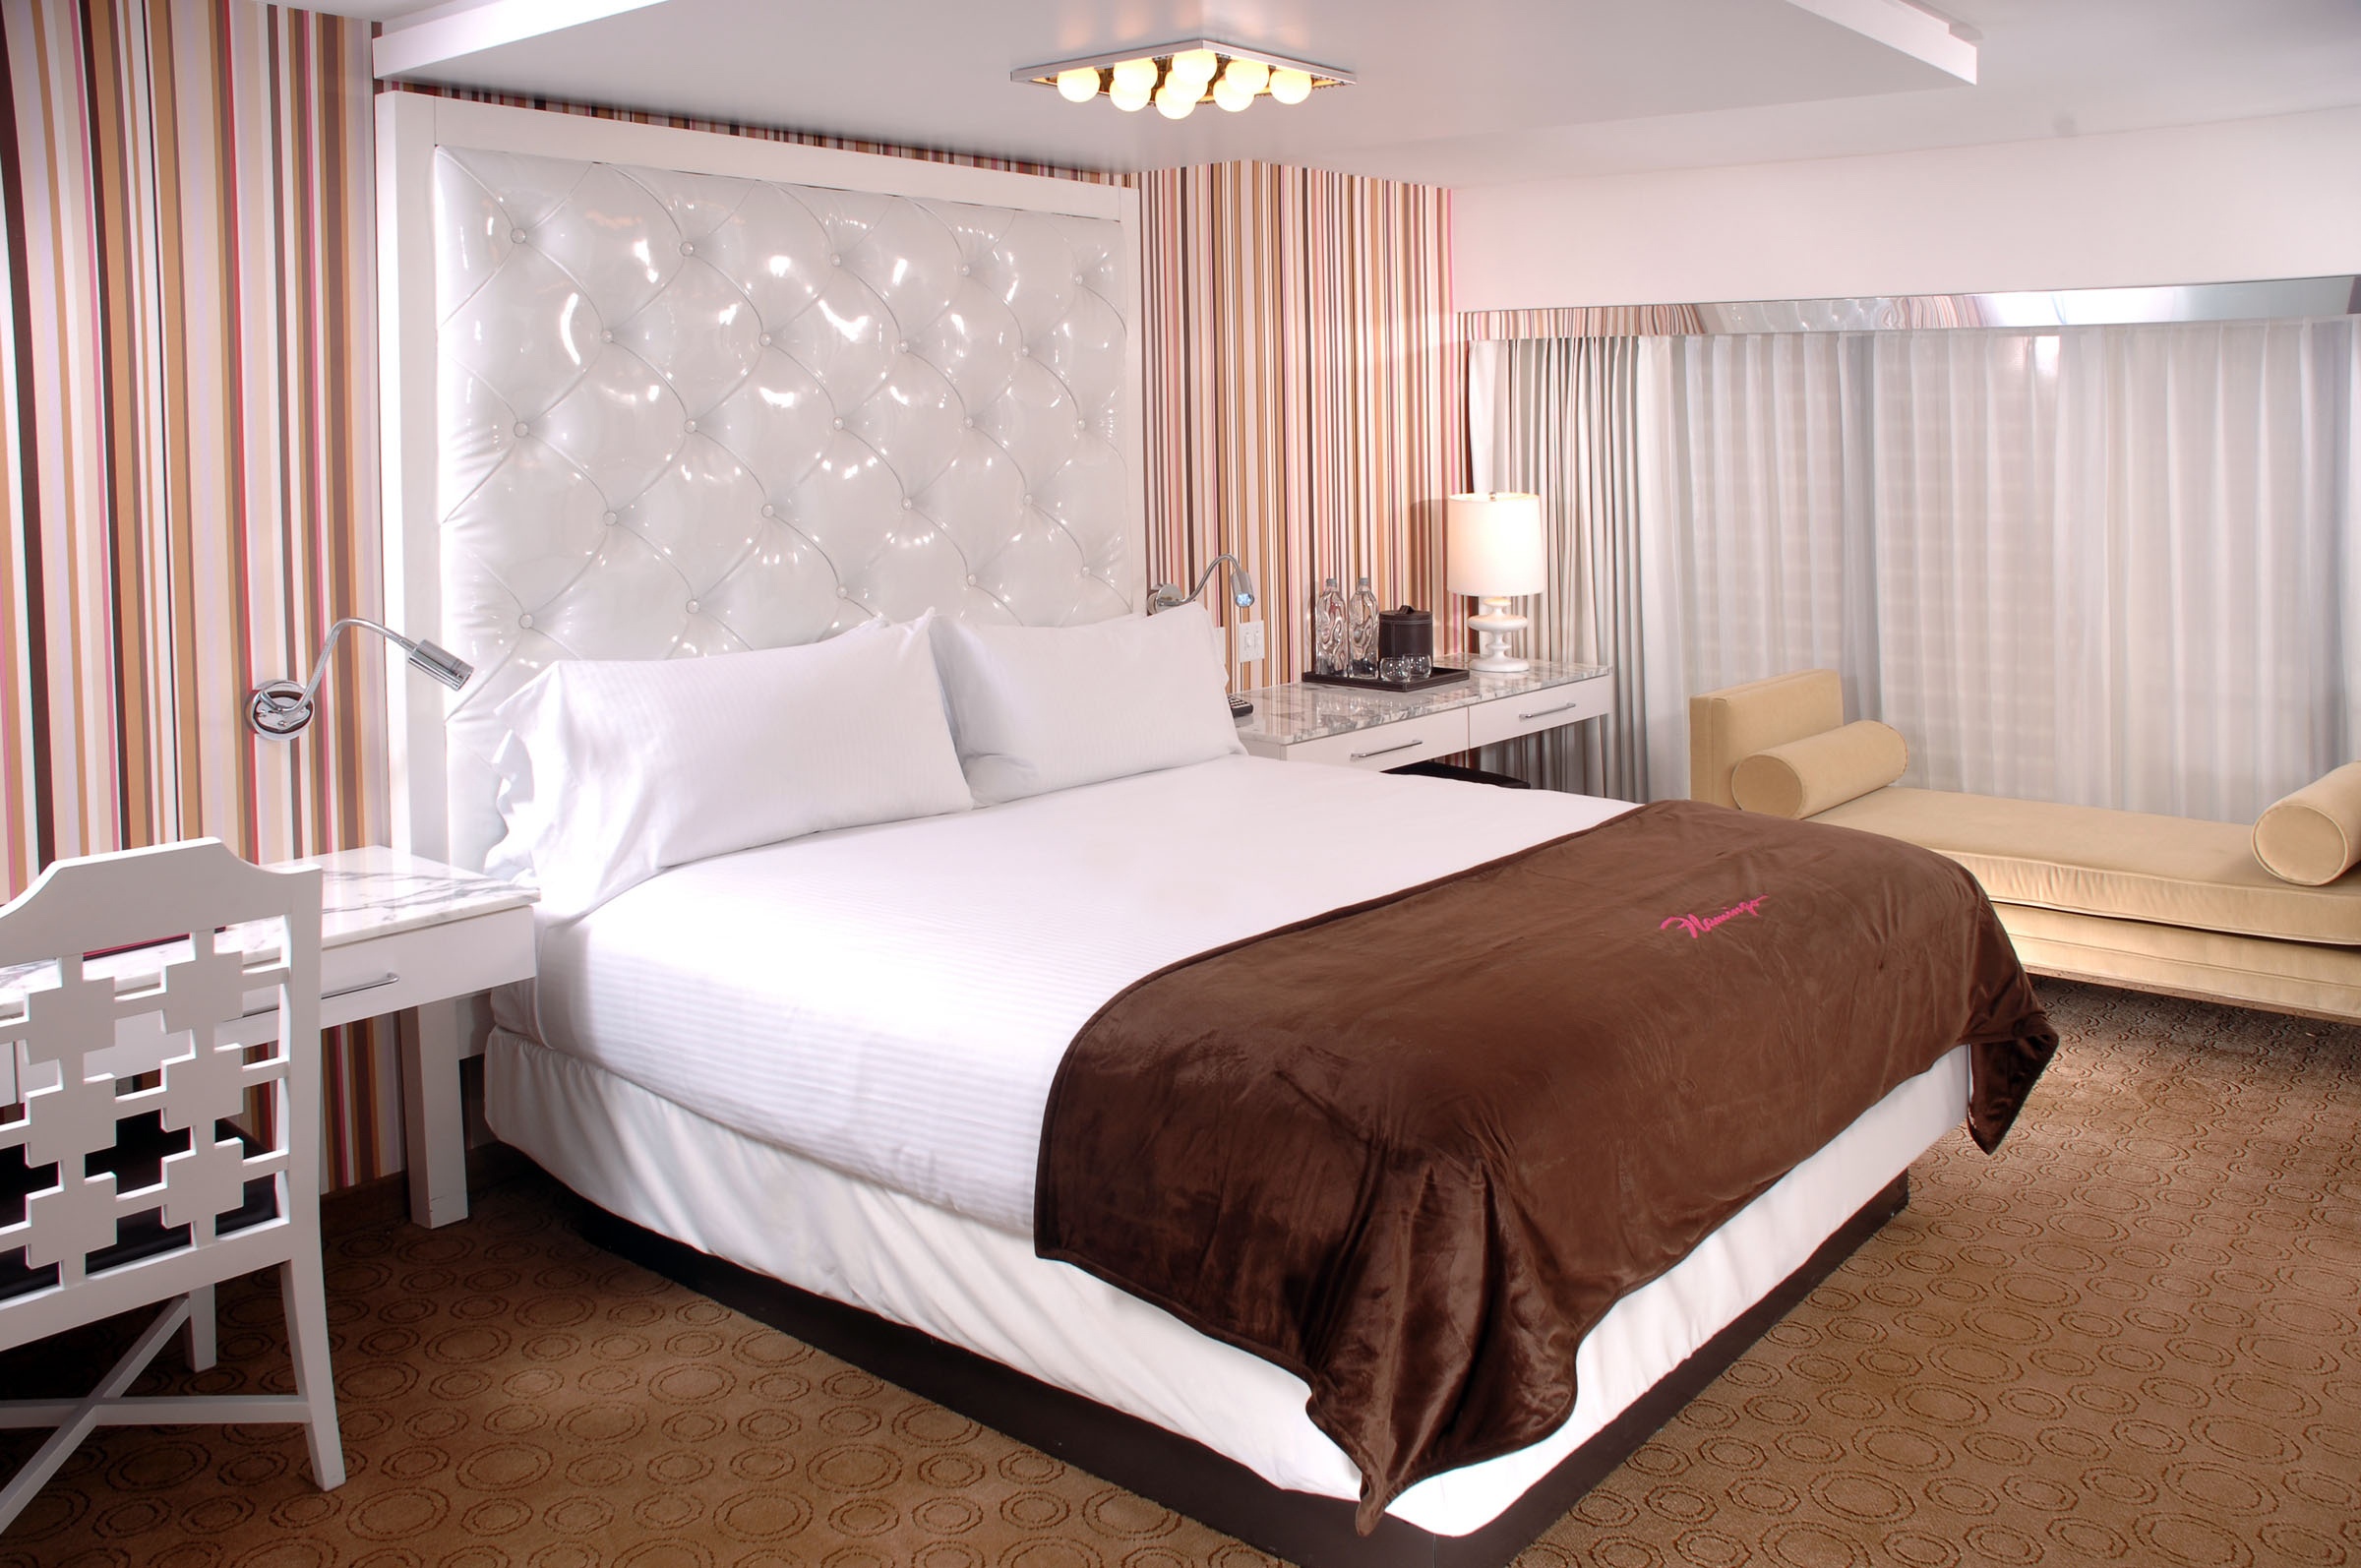 Bold Design and High-Tech Amenities Are the Foundation for Phase II of Flamingo Las Vegas Room ...